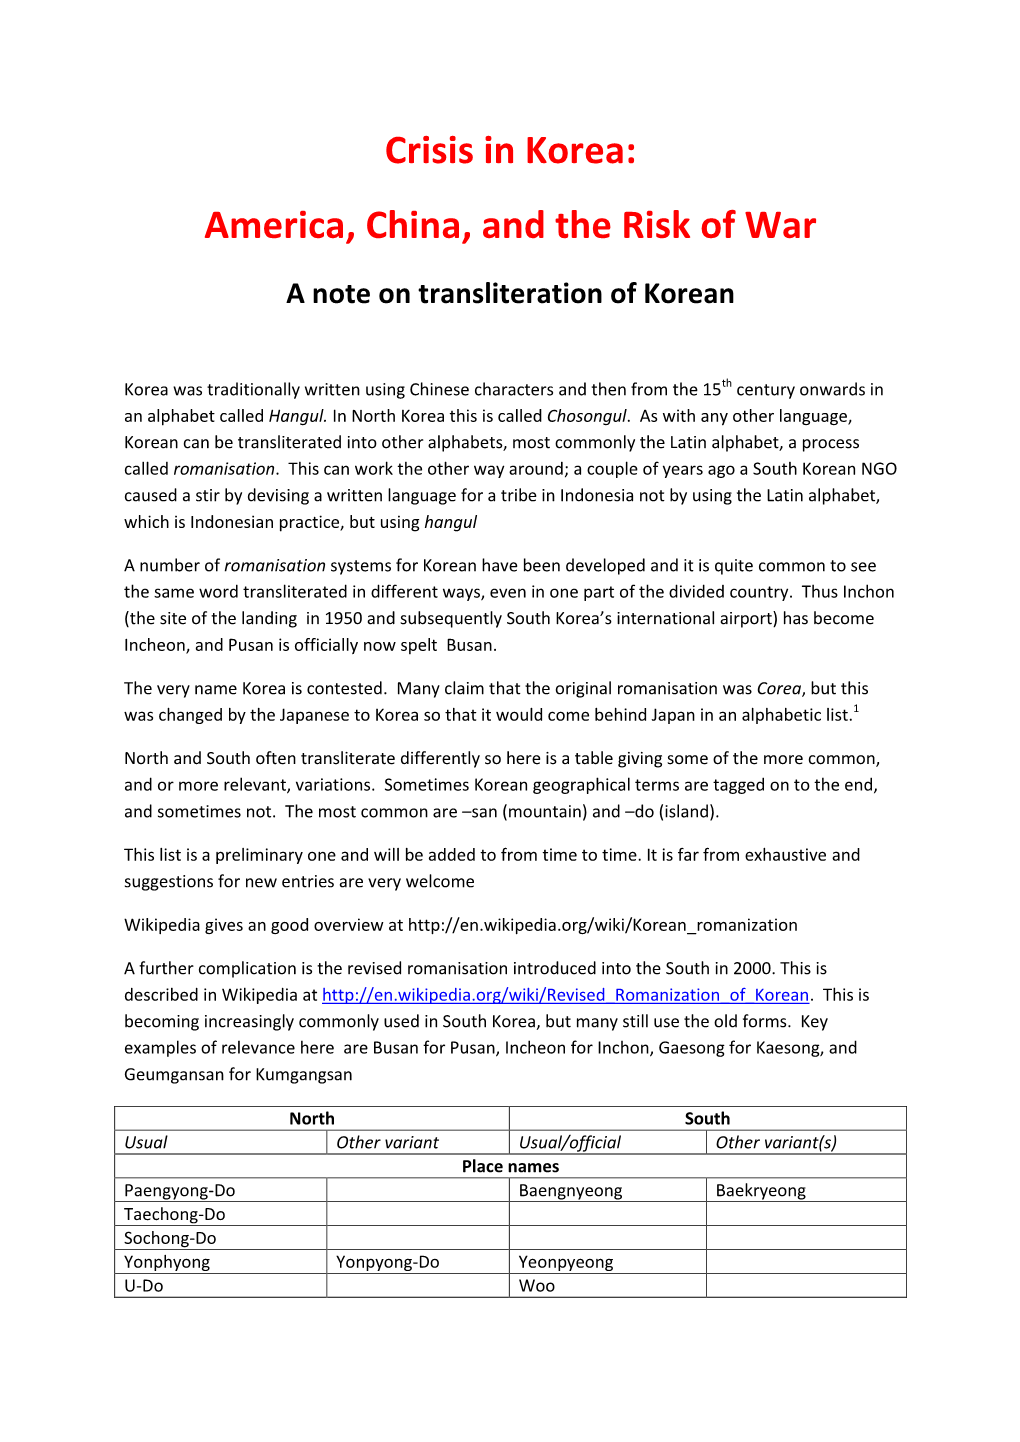 Crisis in Korea: America, China, and the Risk of War